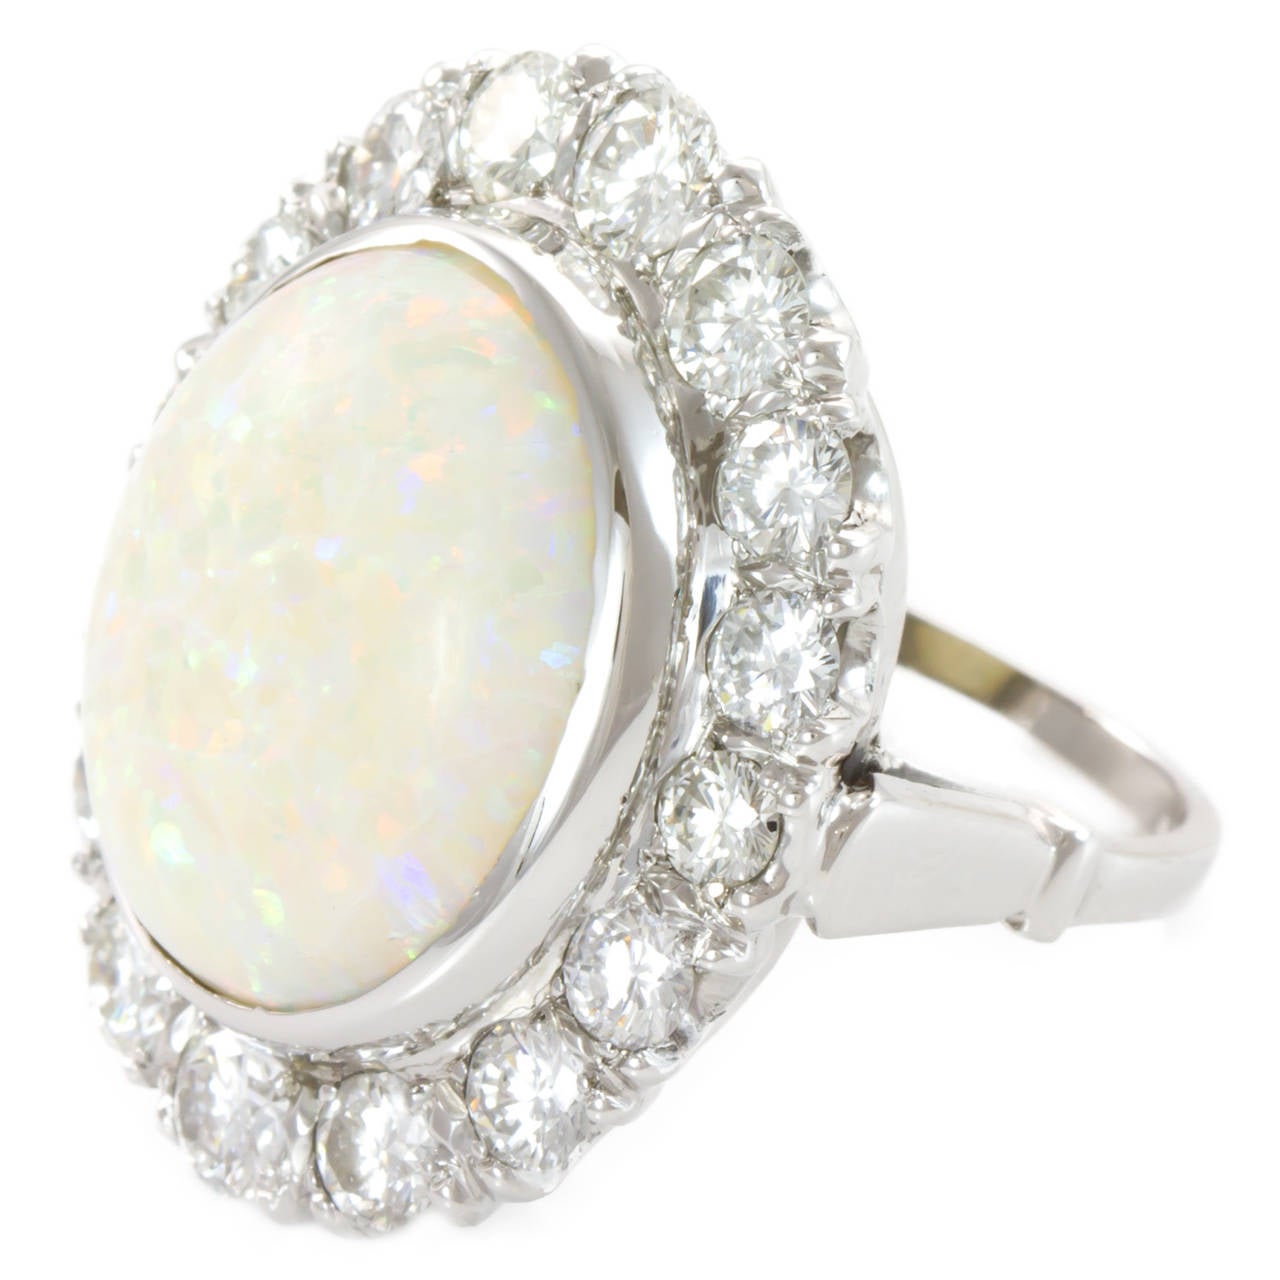 Ladys Cabochon White Opal approximately 13.05 carats. Approximately 4.00 carats of very clean and near colorless Round Brilliant Diamonds encircle the center Opal. Ring is cast in Platinum and good craftsmanship. Ring is easily sizable. 

One (1)